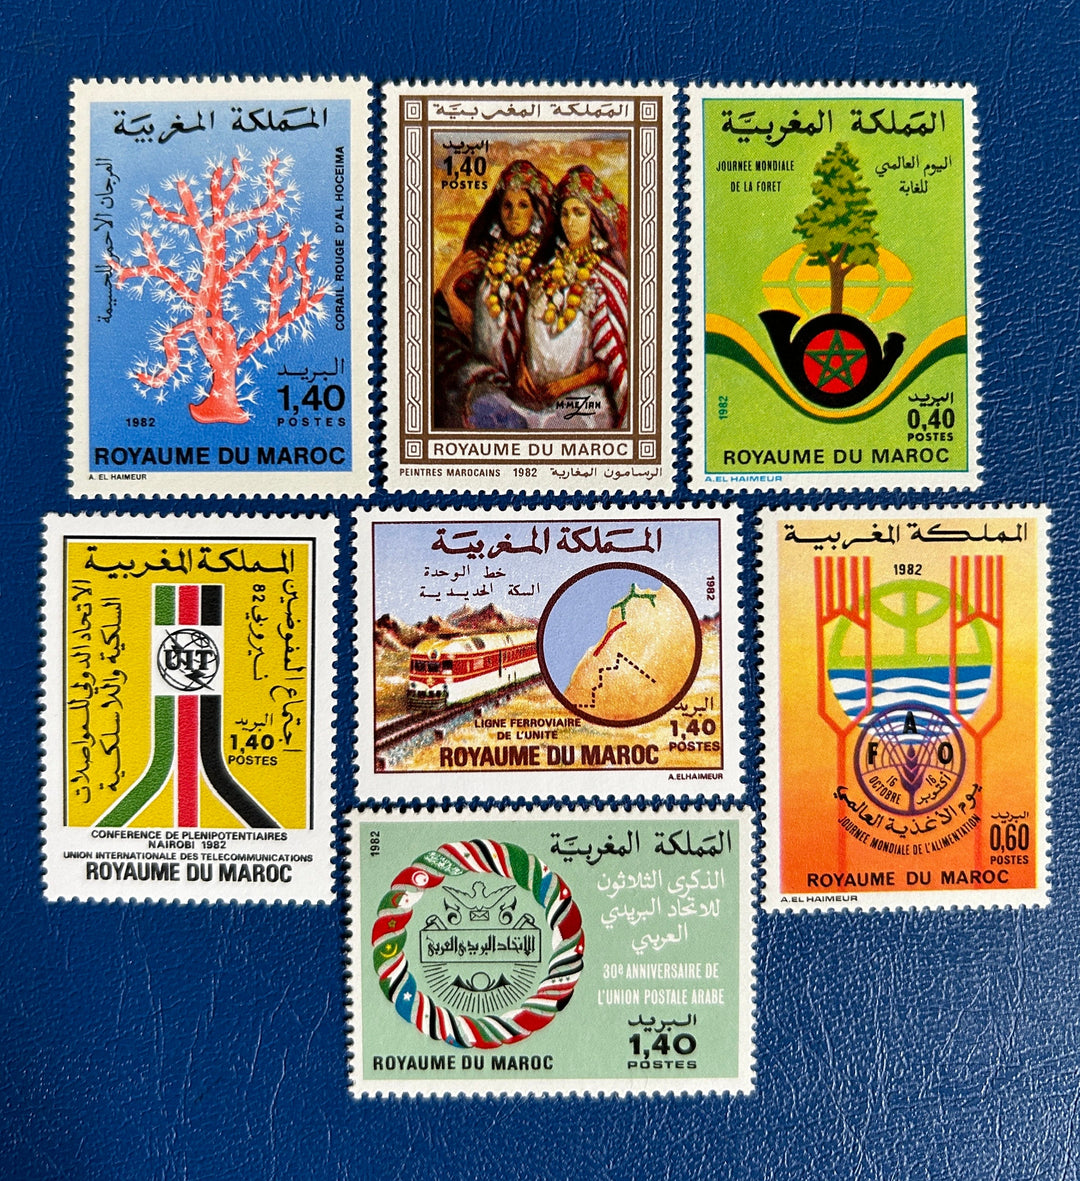 Morocco - Original Vintage Postage Stamps- 1982 Mix - for the collector, artist or crafter